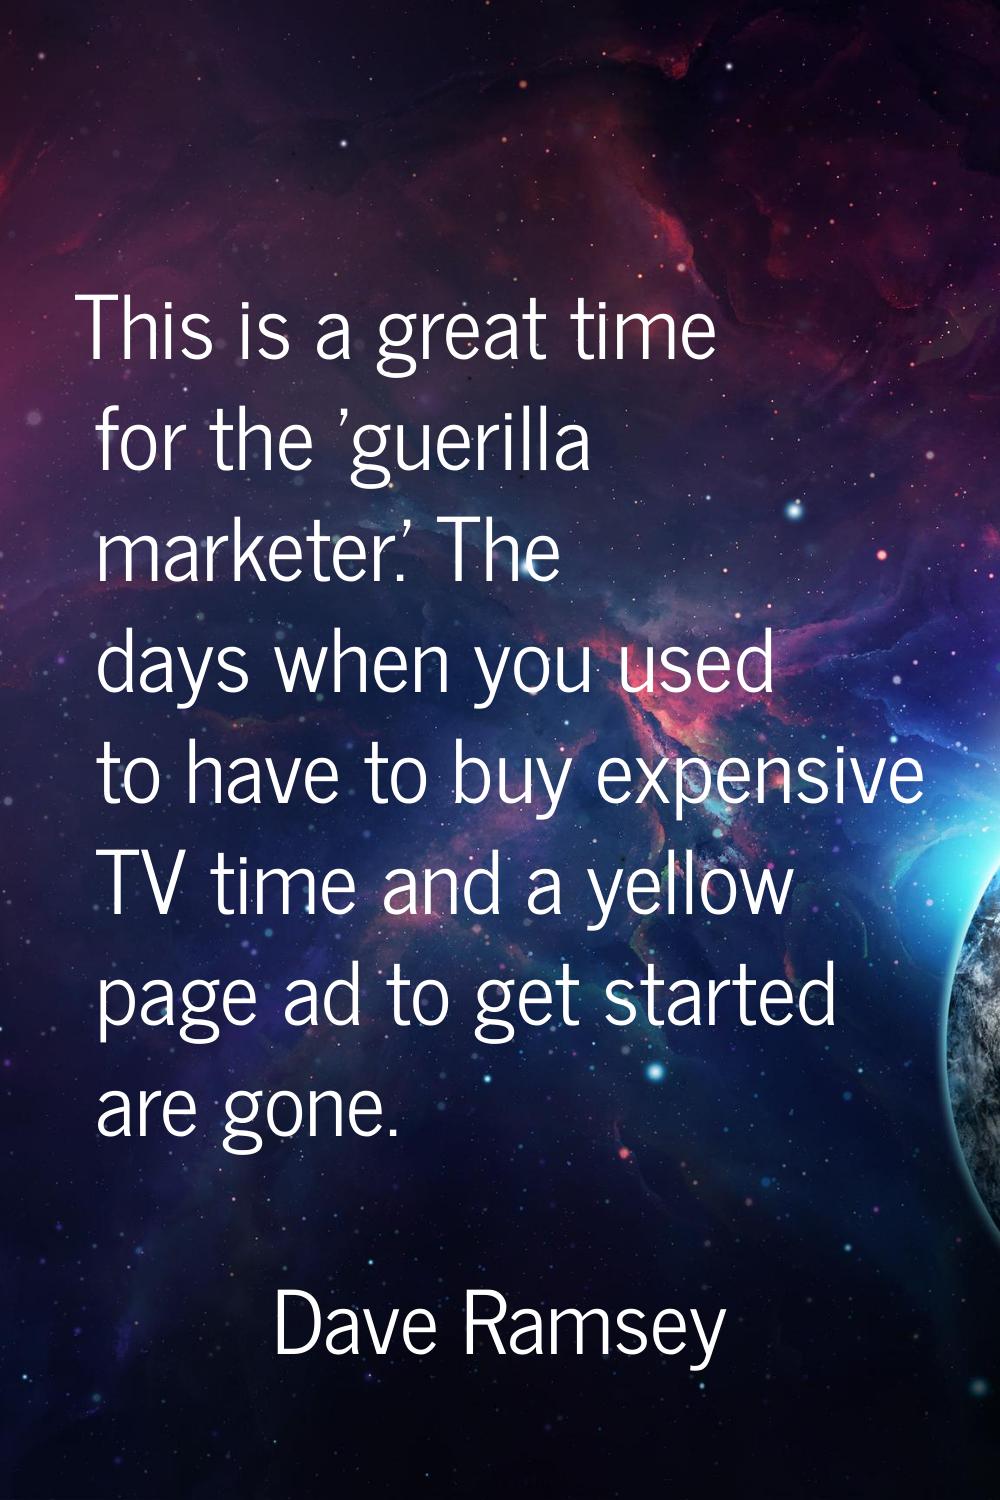 This is a great time for the 'guerilla marketer.' The days when you used to have to buy expensive T